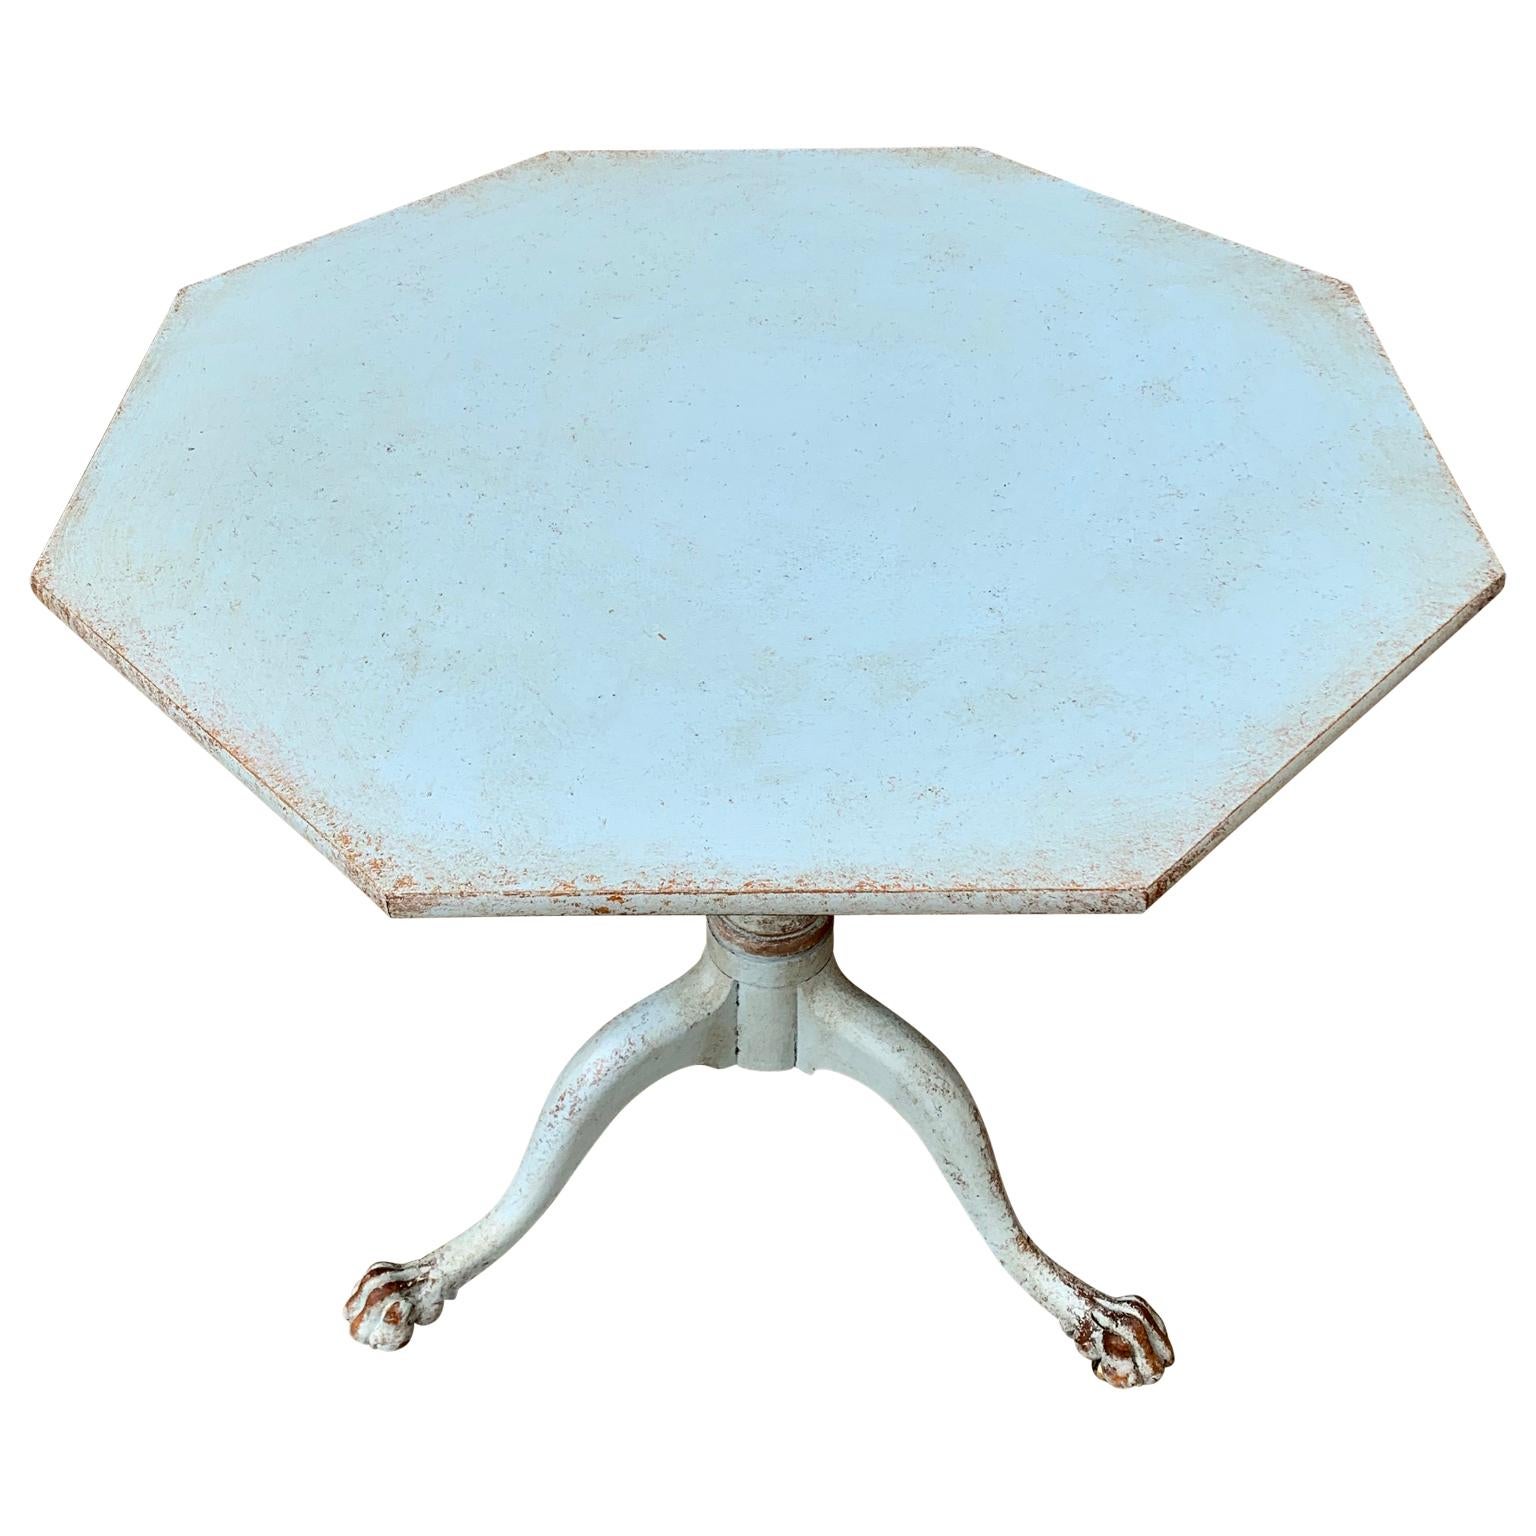 Swedish Empire octagonal blue painted tilt-top pedestal end table with claw and ball feet with rotating table top.


Please note that this table is located in Halmstad, Sweden.
 